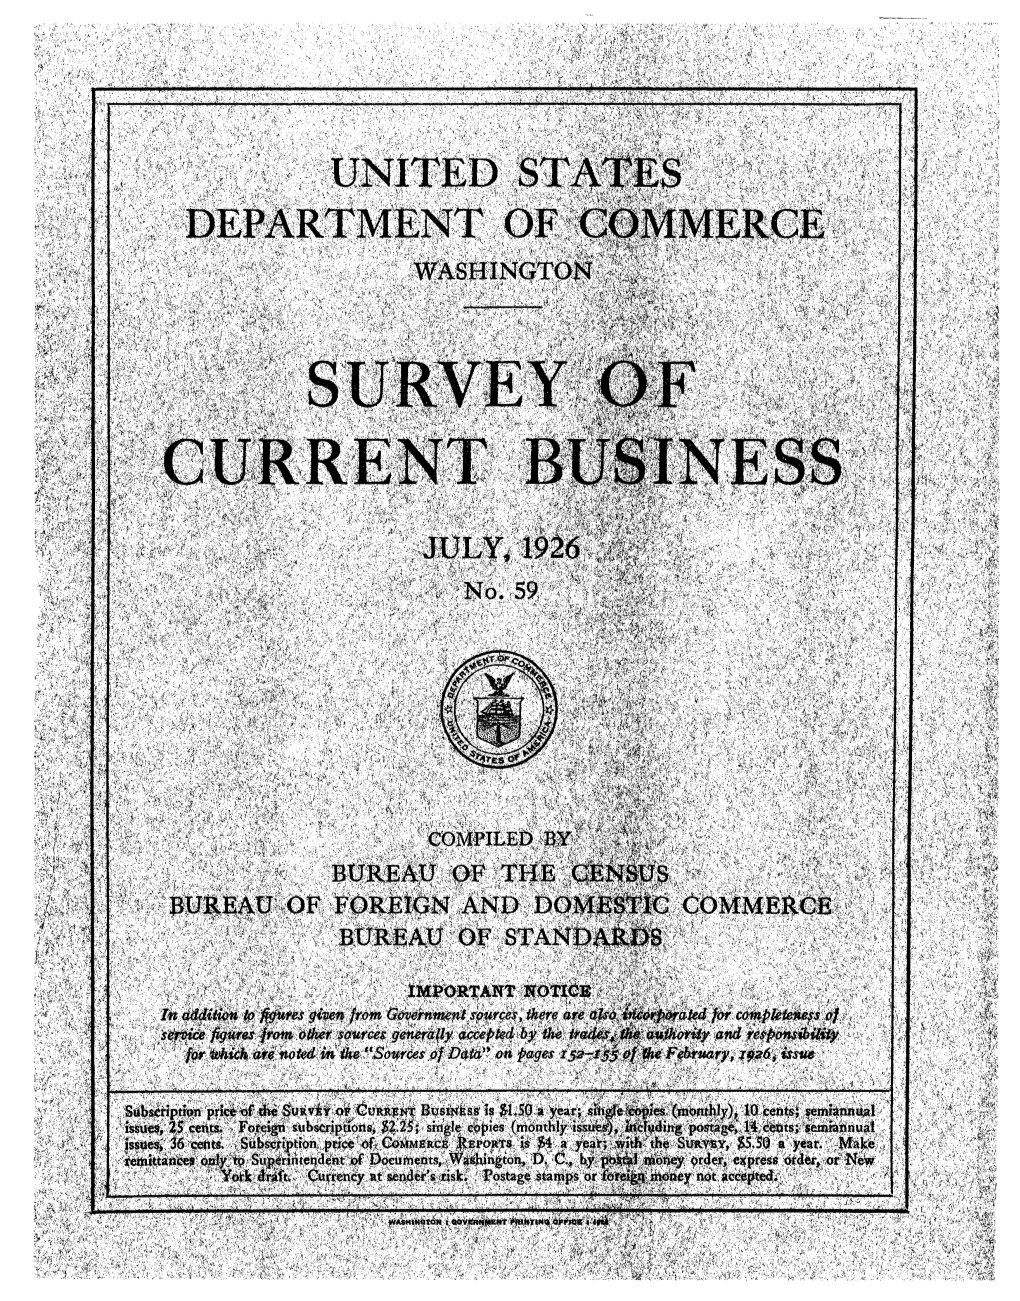 Survey of Current Business July 1926